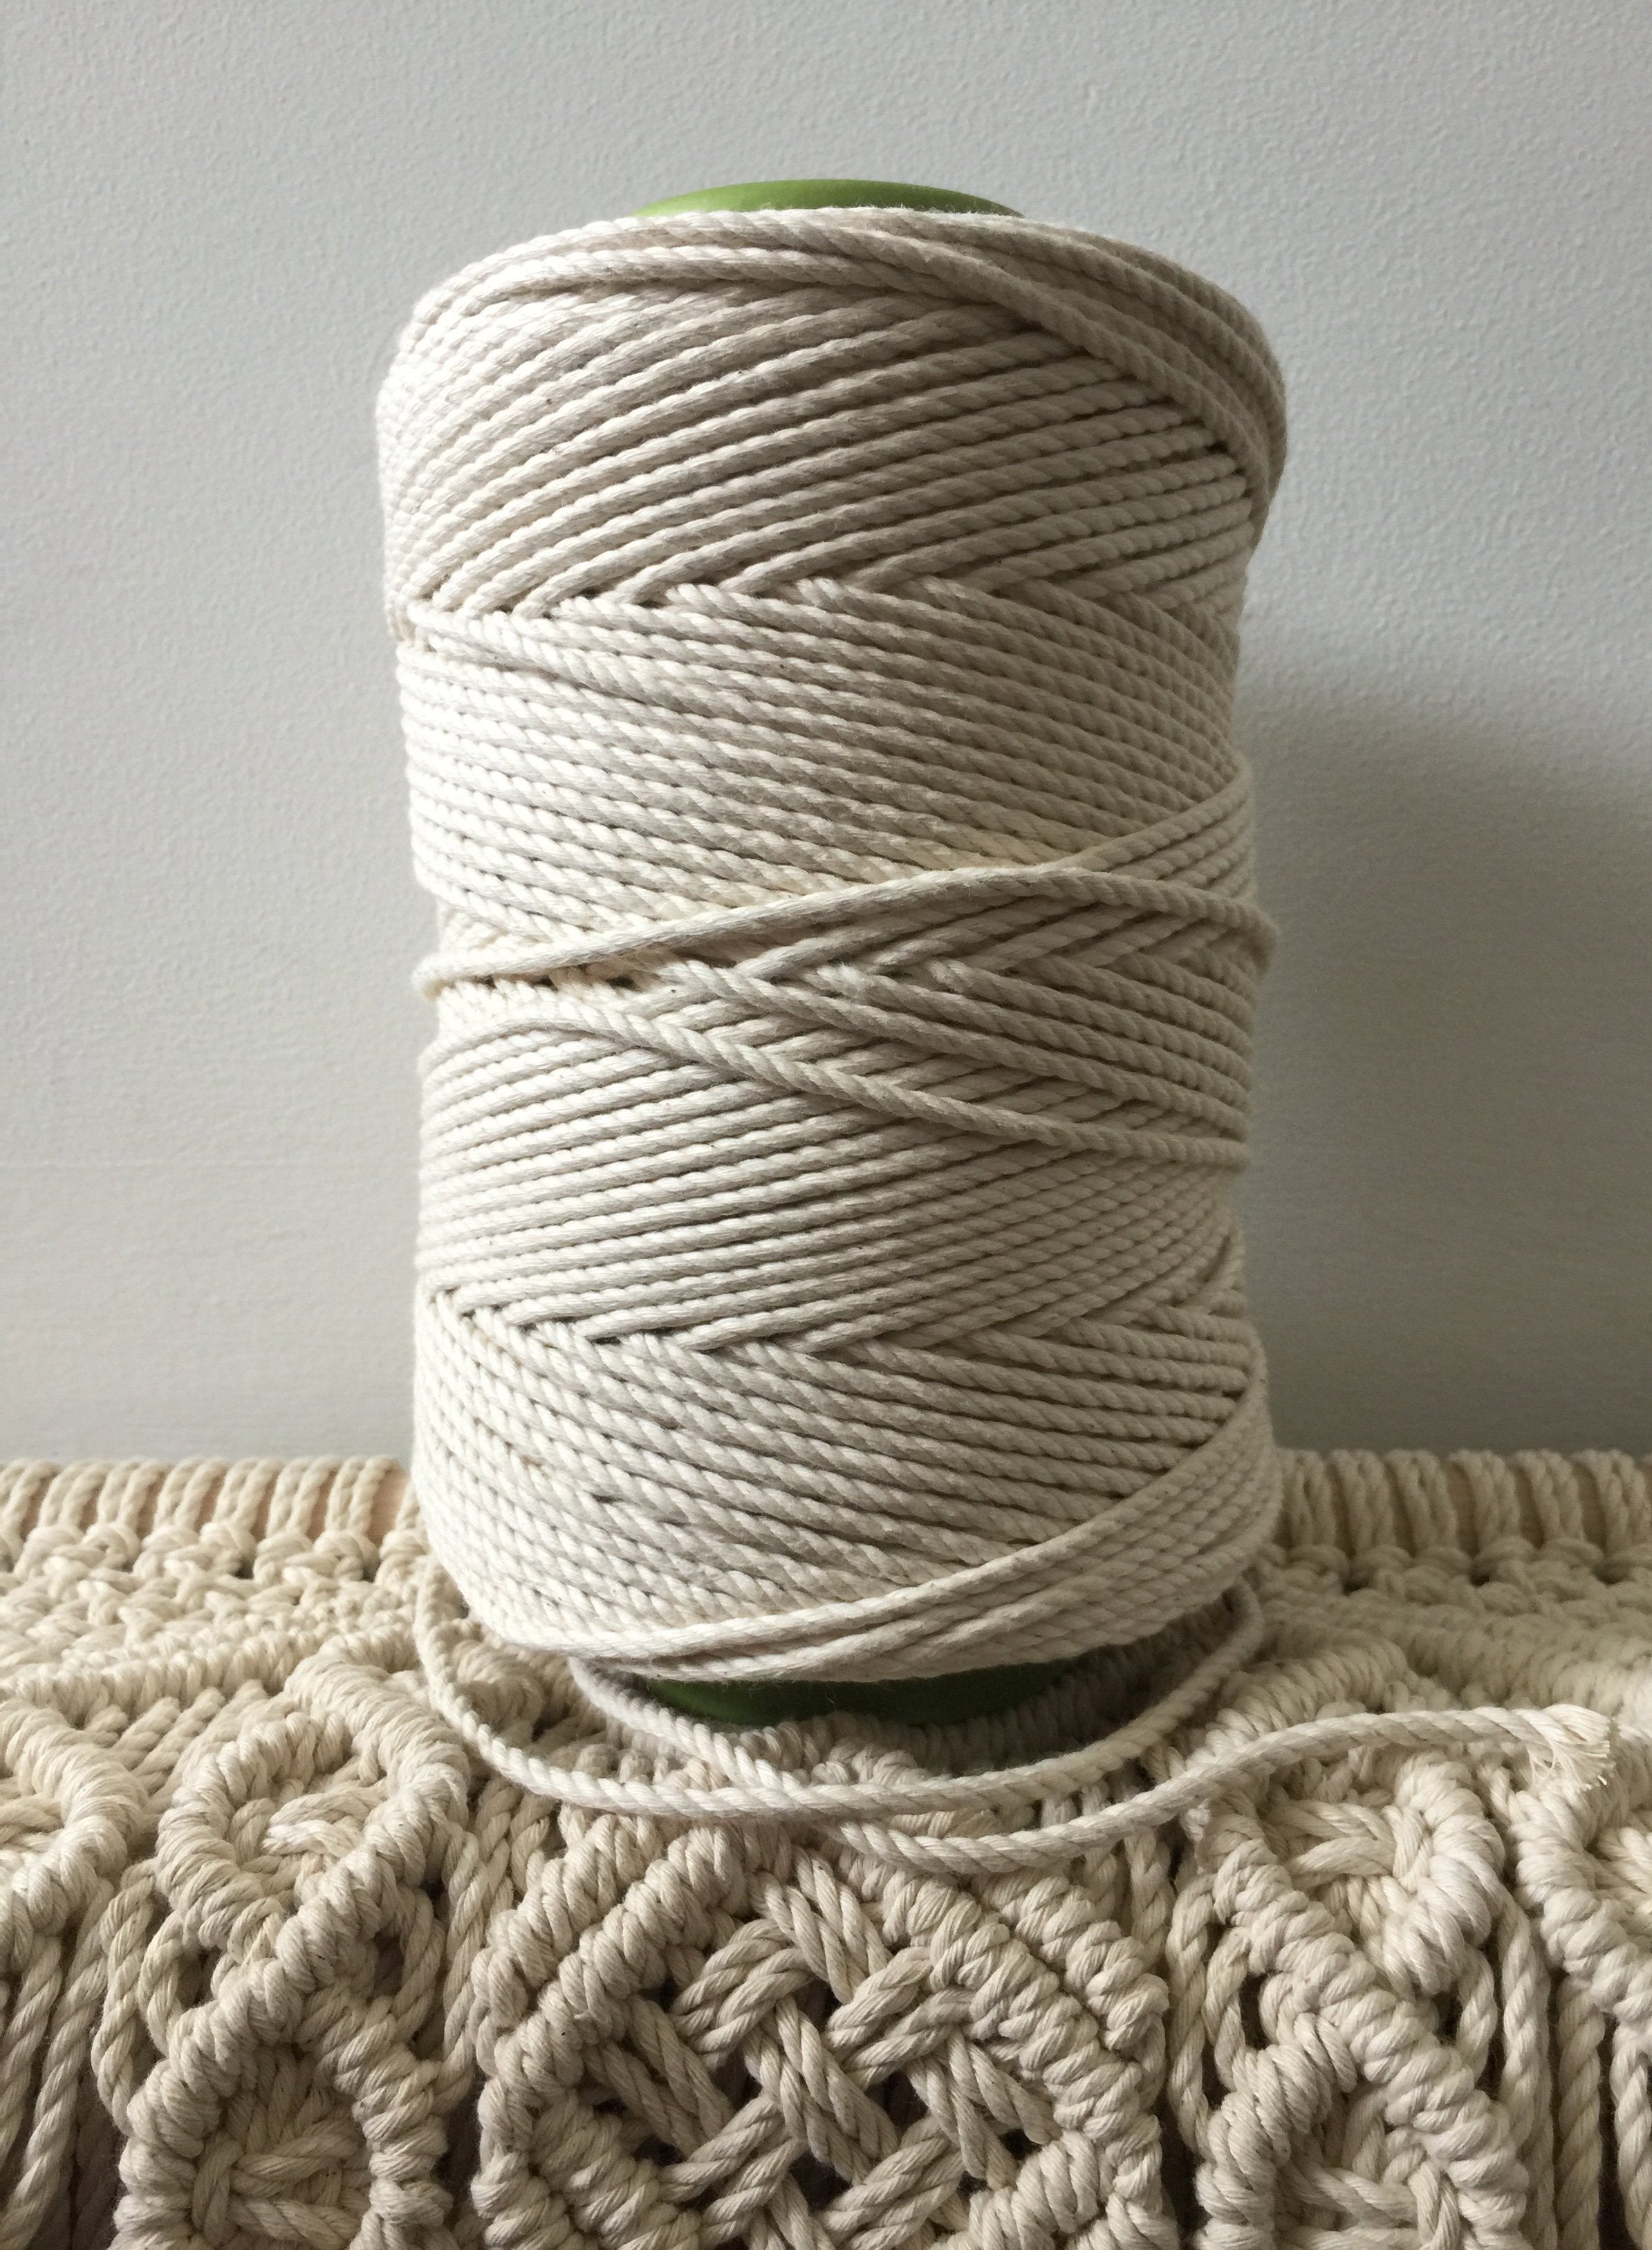 4mm 3ply Rope - Natural - 1kg